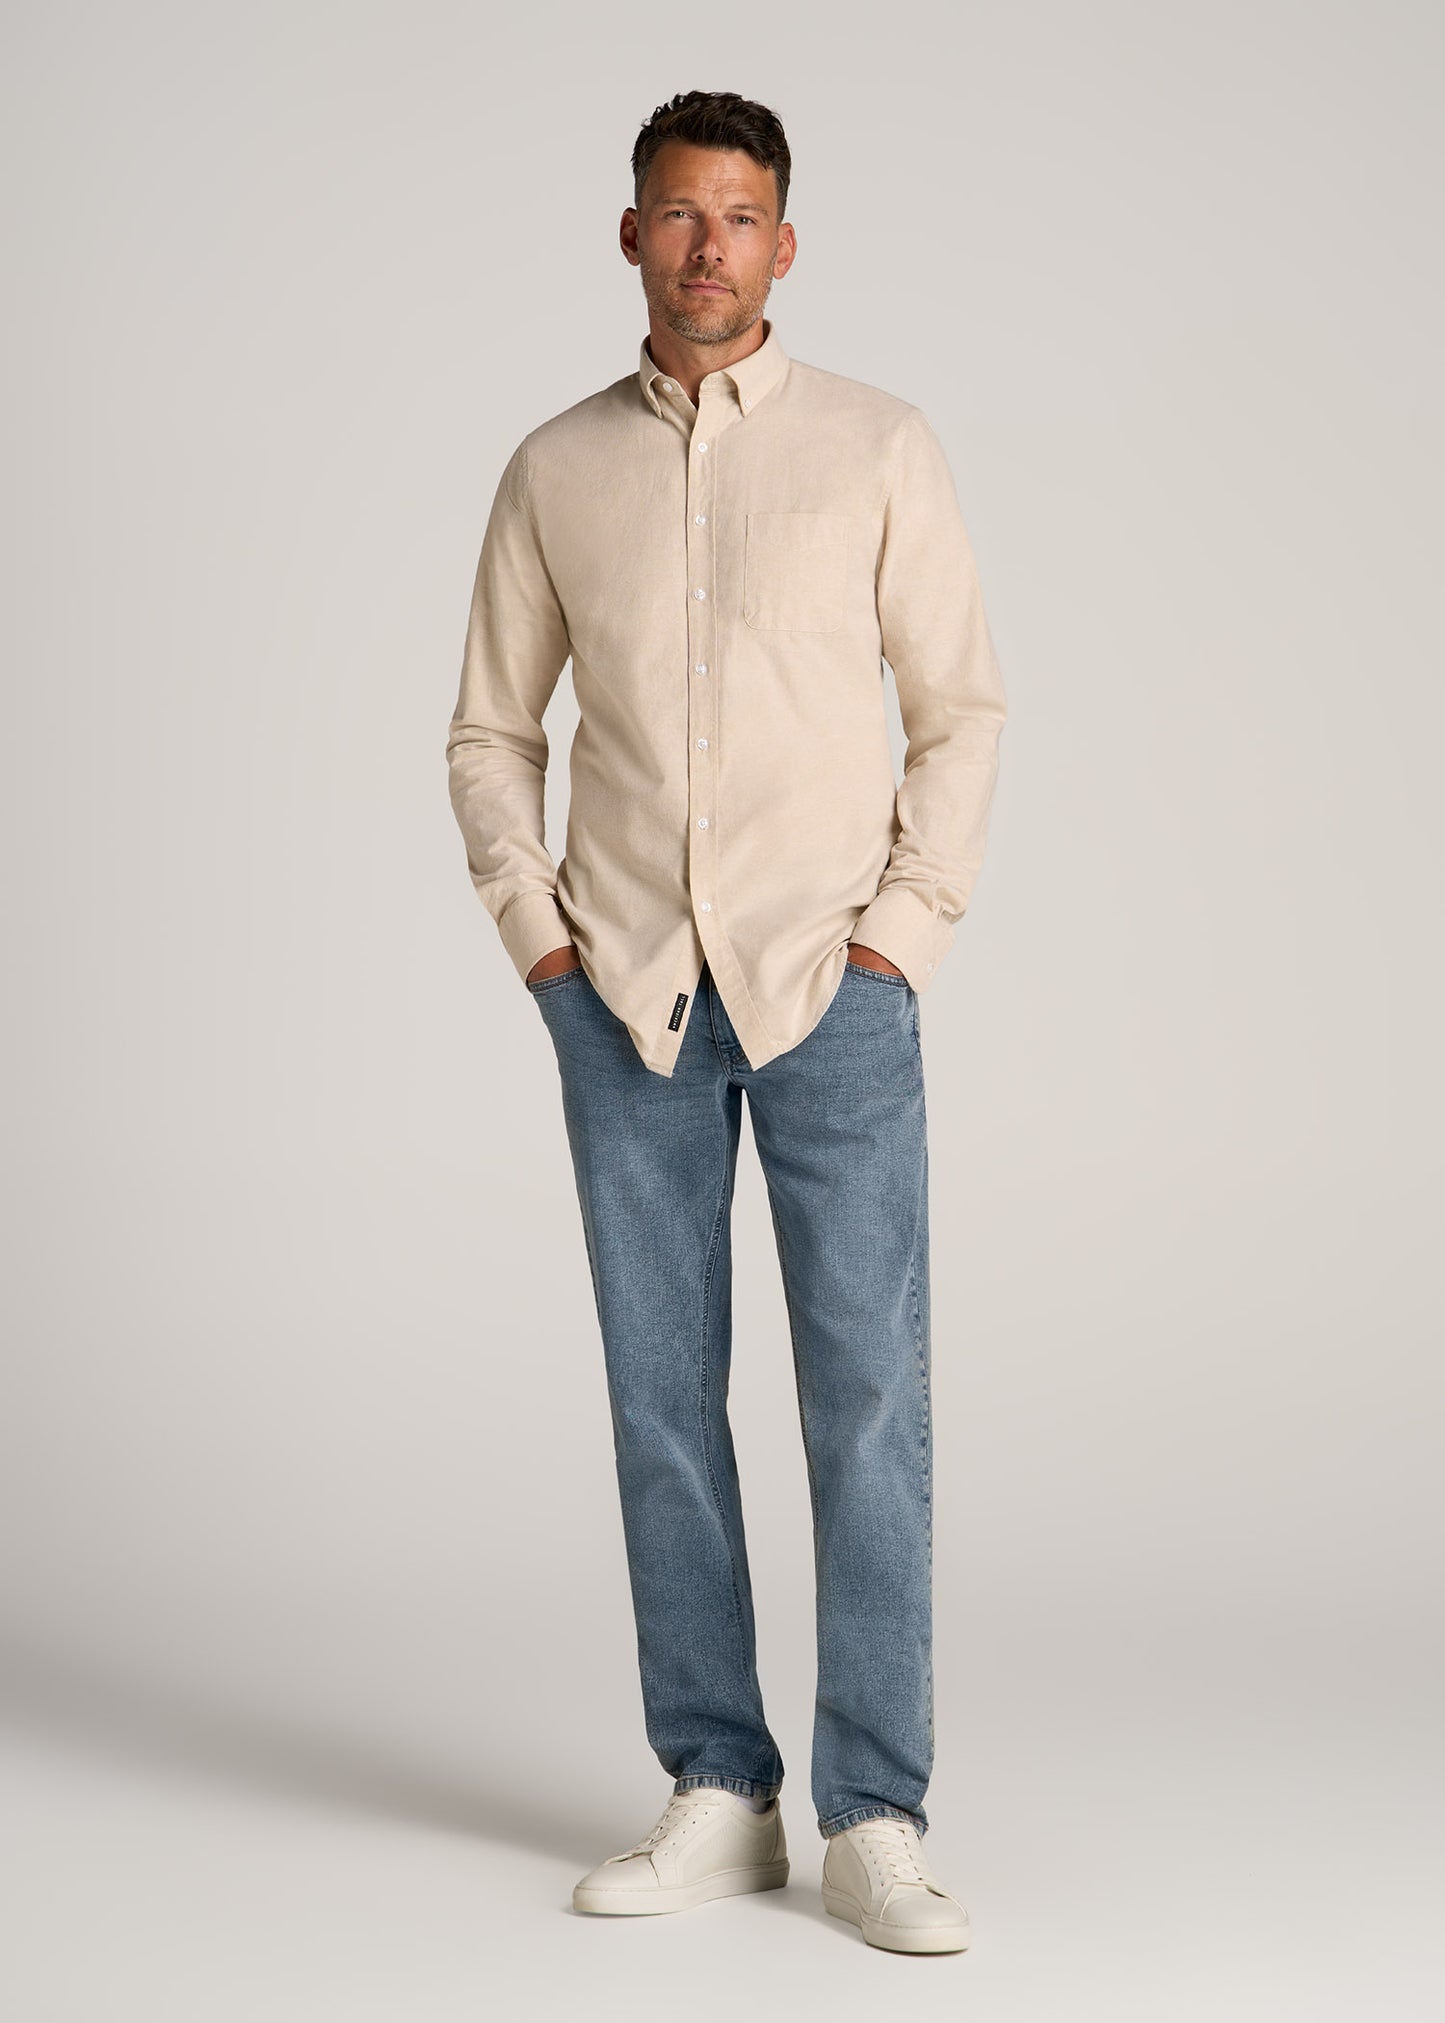 Washed Oxford Shirt for Tall Men in Sandstone